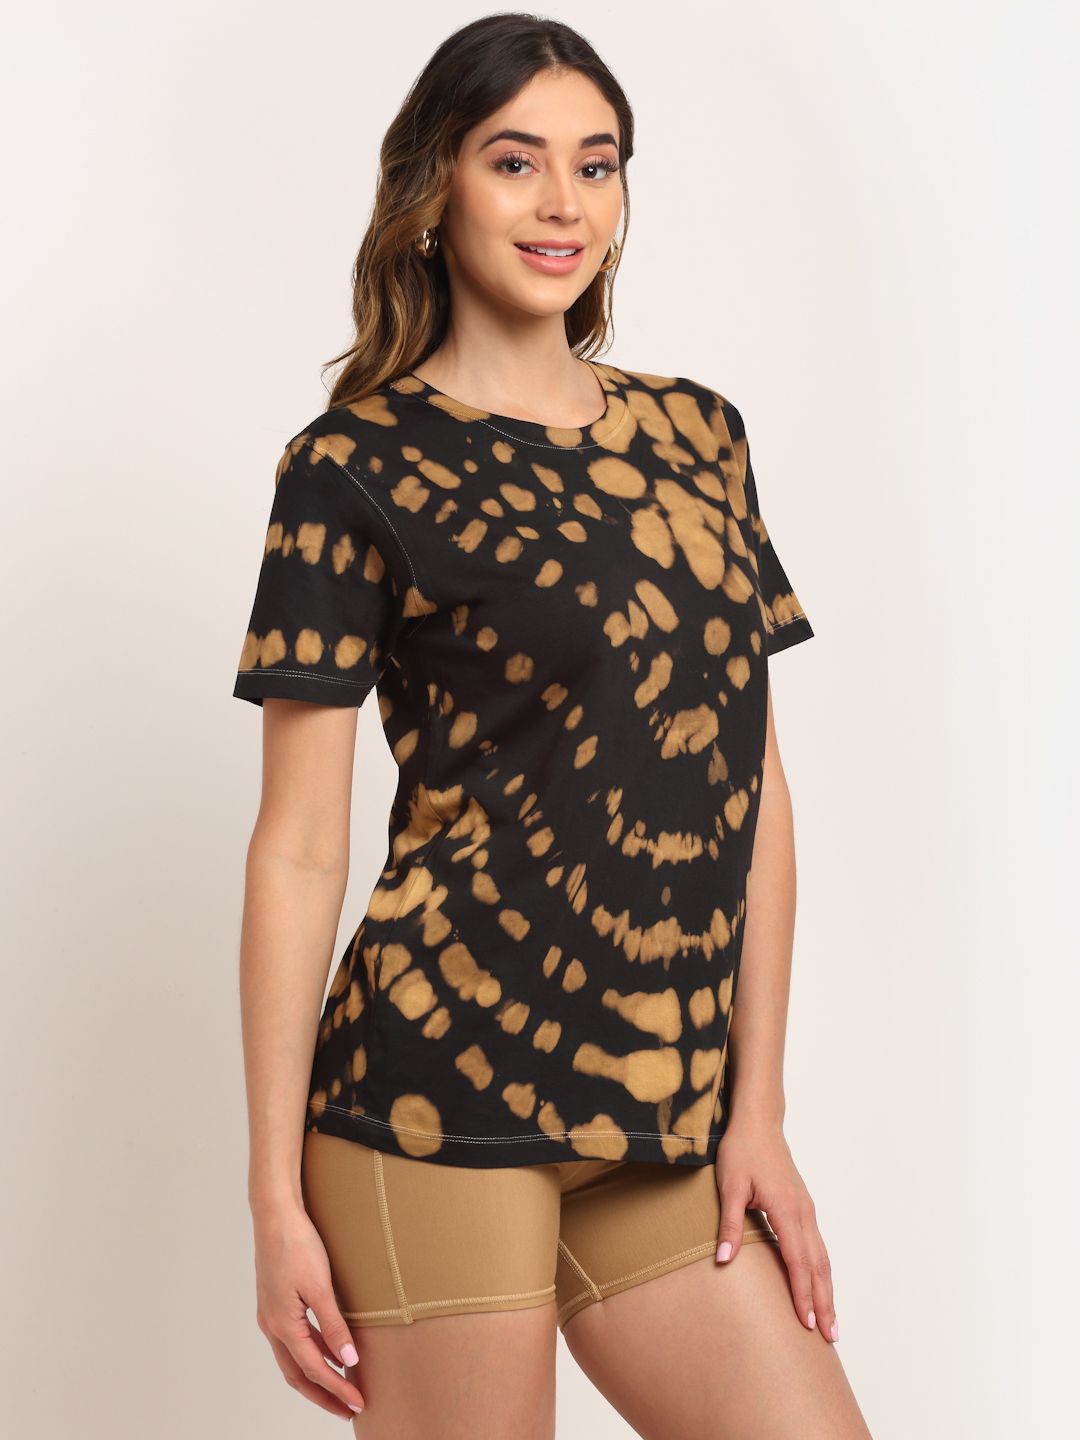 Abstract Pattern, Women Combed Cotton Tie & Dye Black T-Shirt